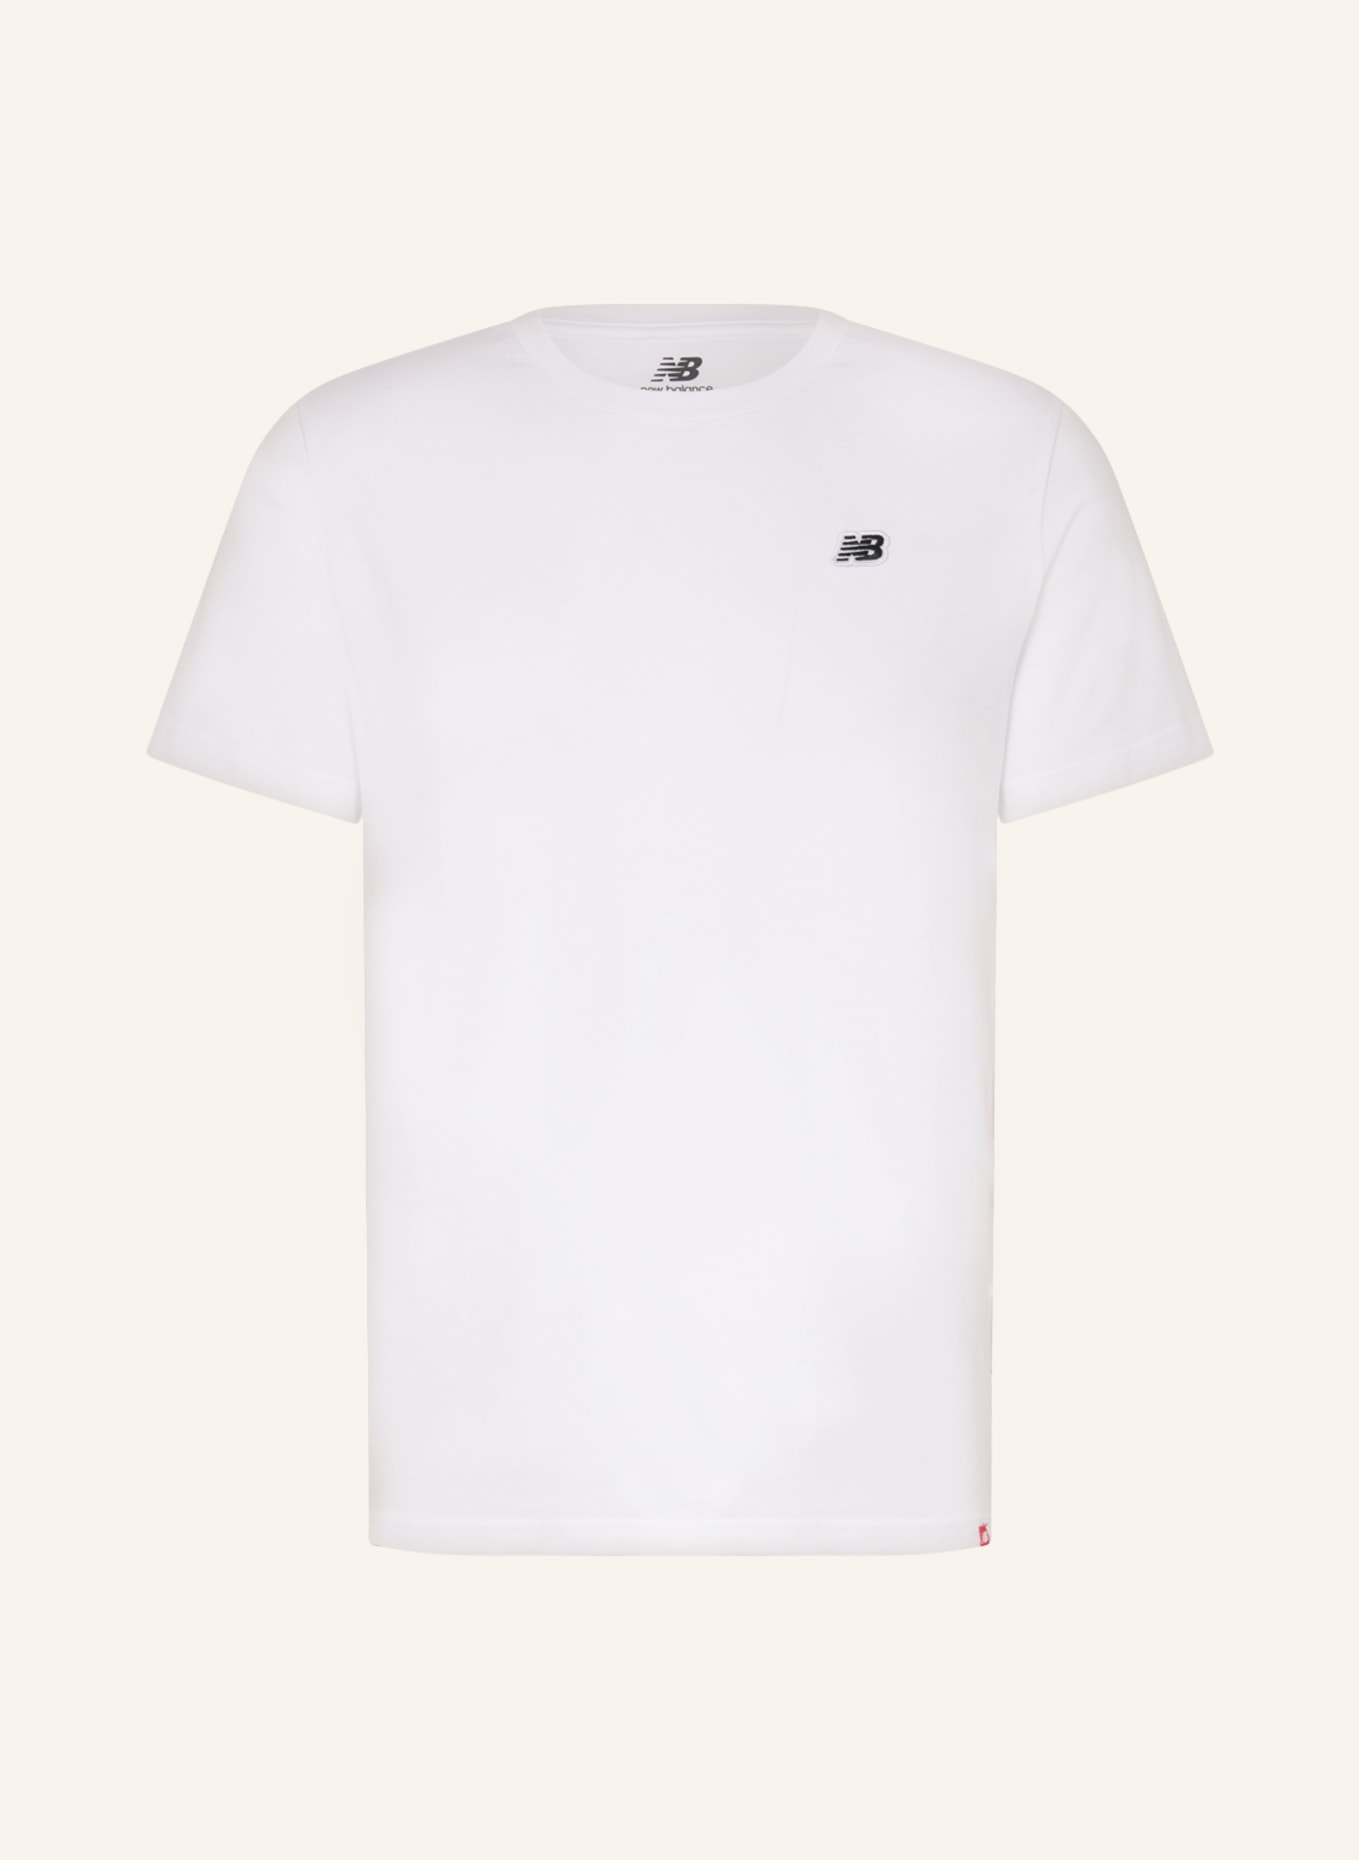 balance new NB SMALL white in T-shirt